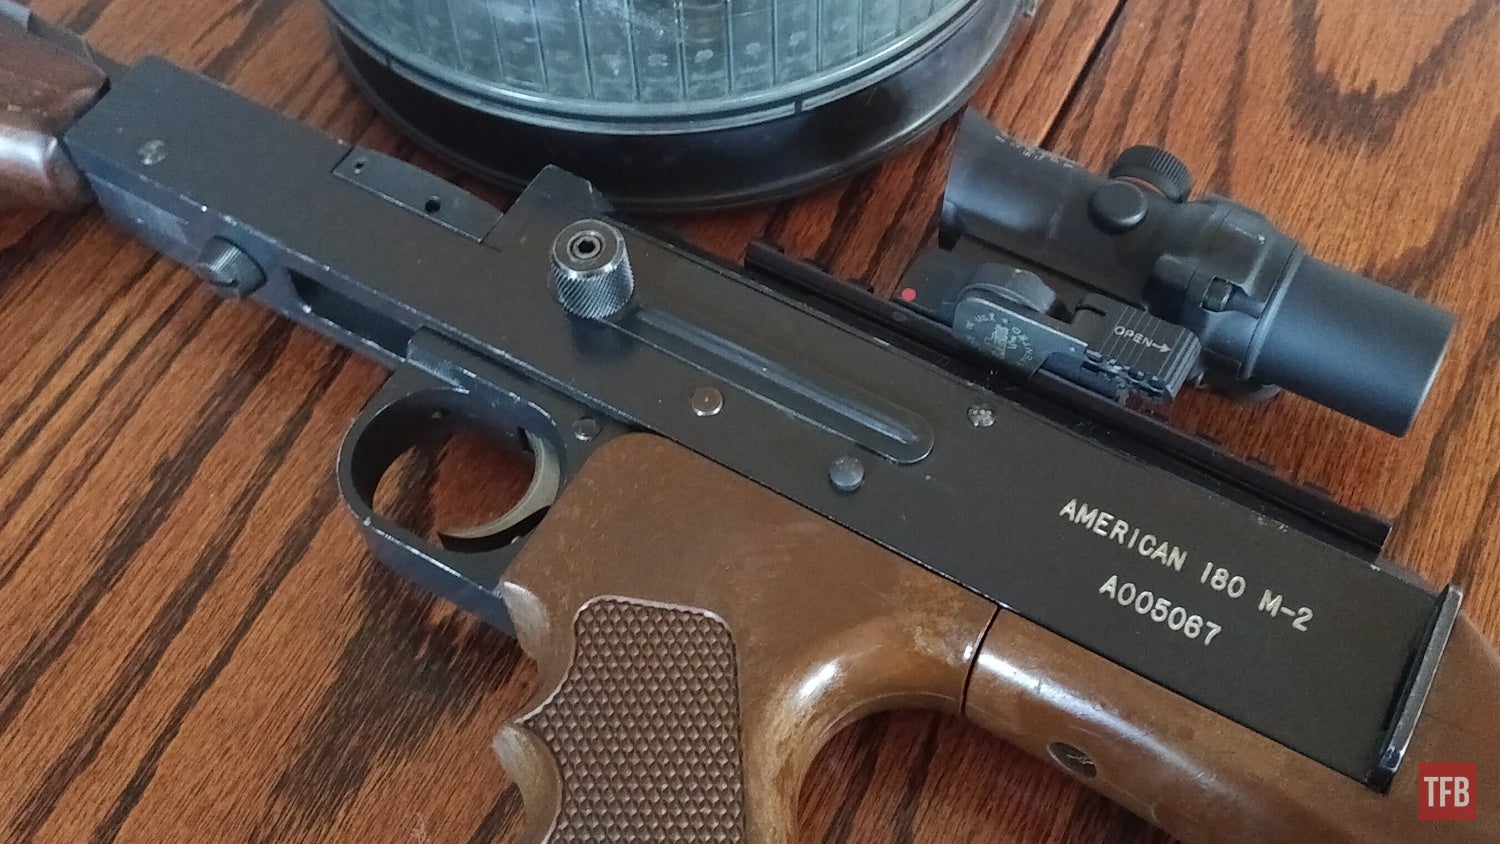 The Rimfire Report: Hands-On with the American 180 Submachine Gun